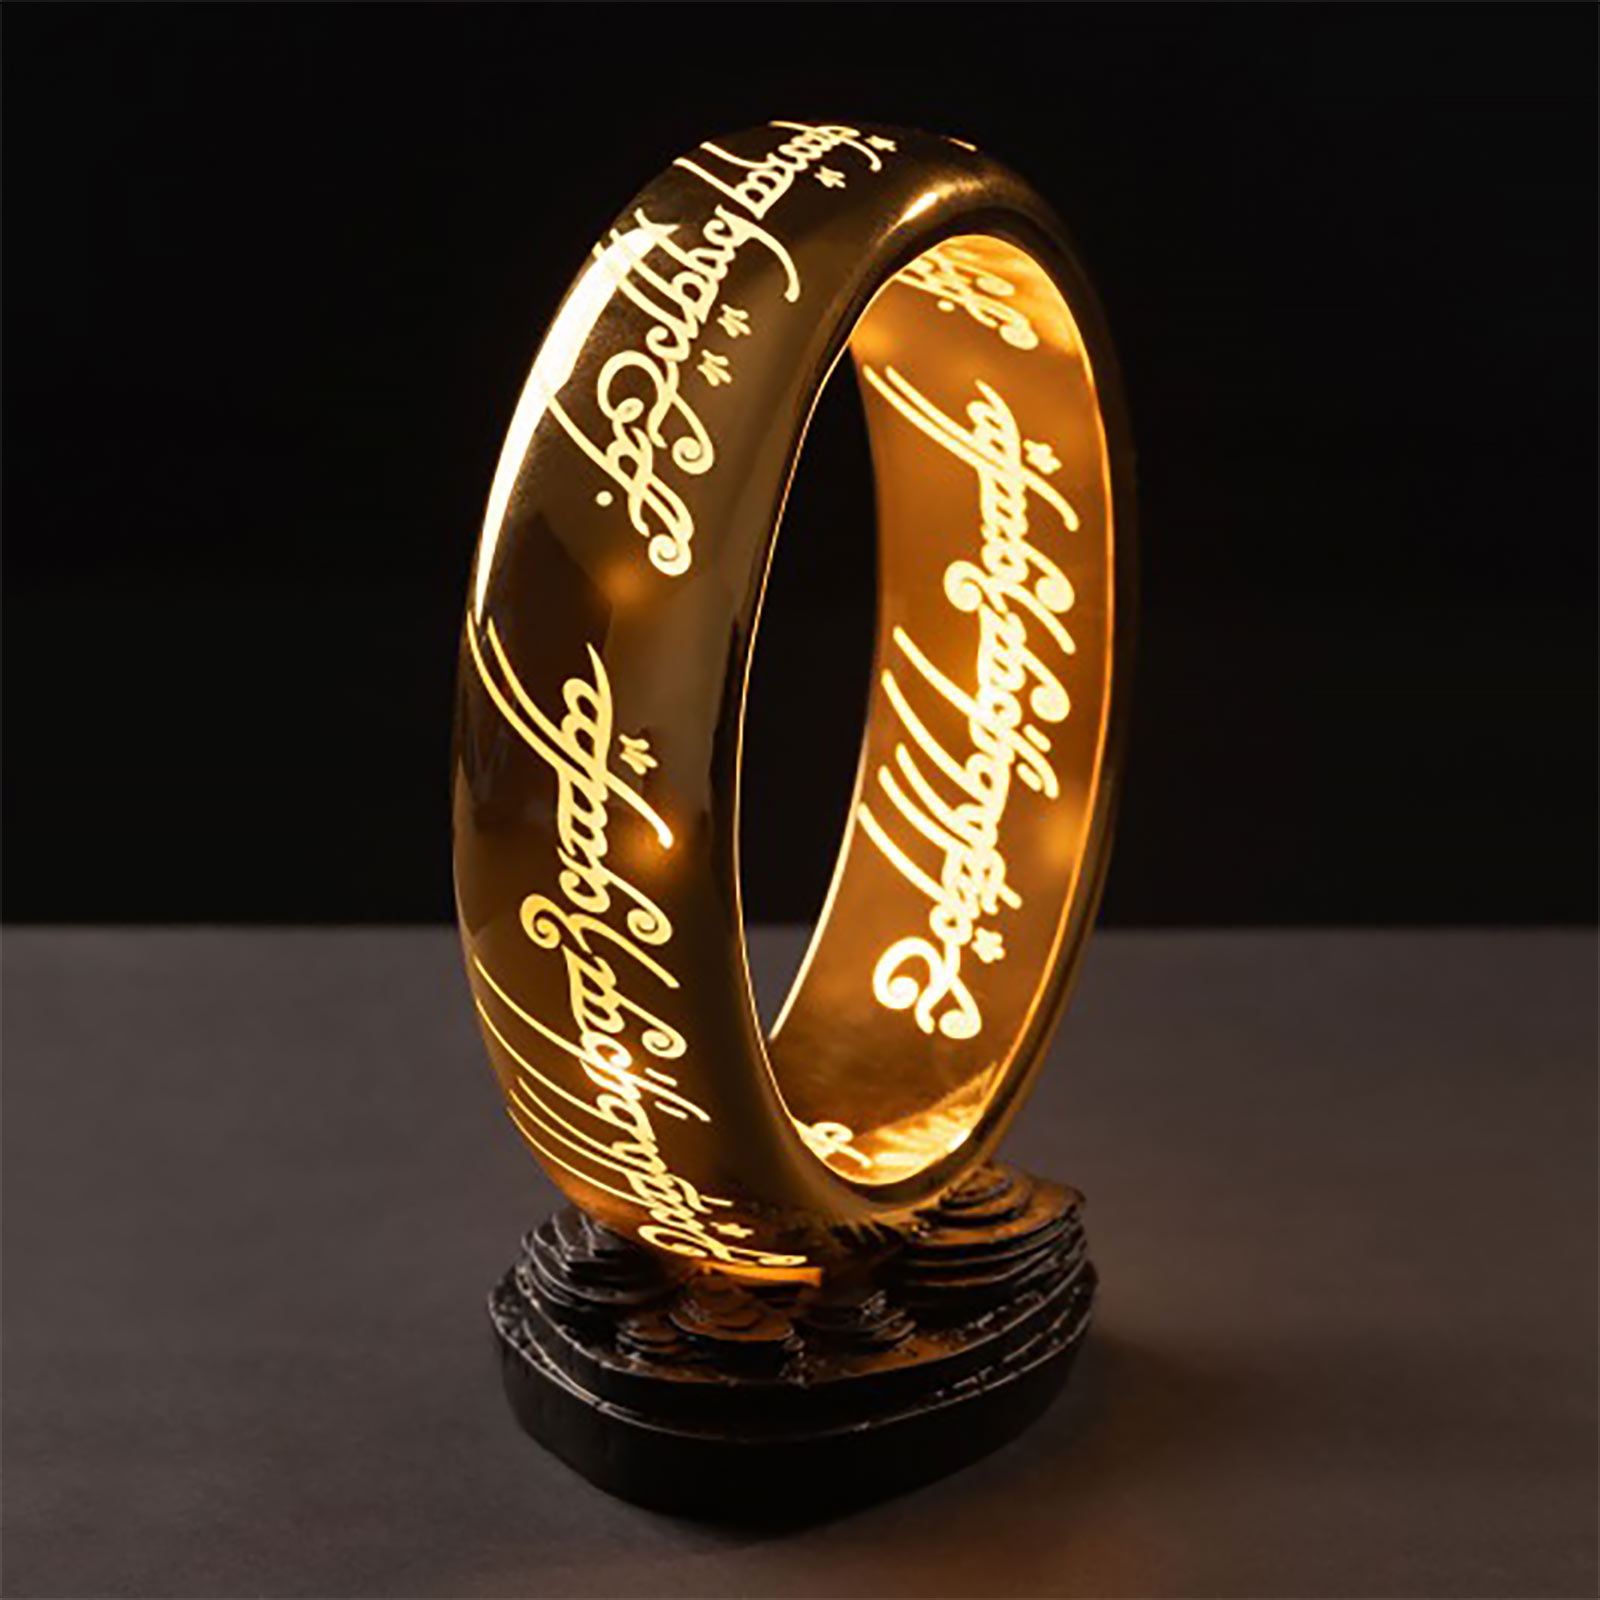 Lord of the Rings - The One Ring Table Lamp